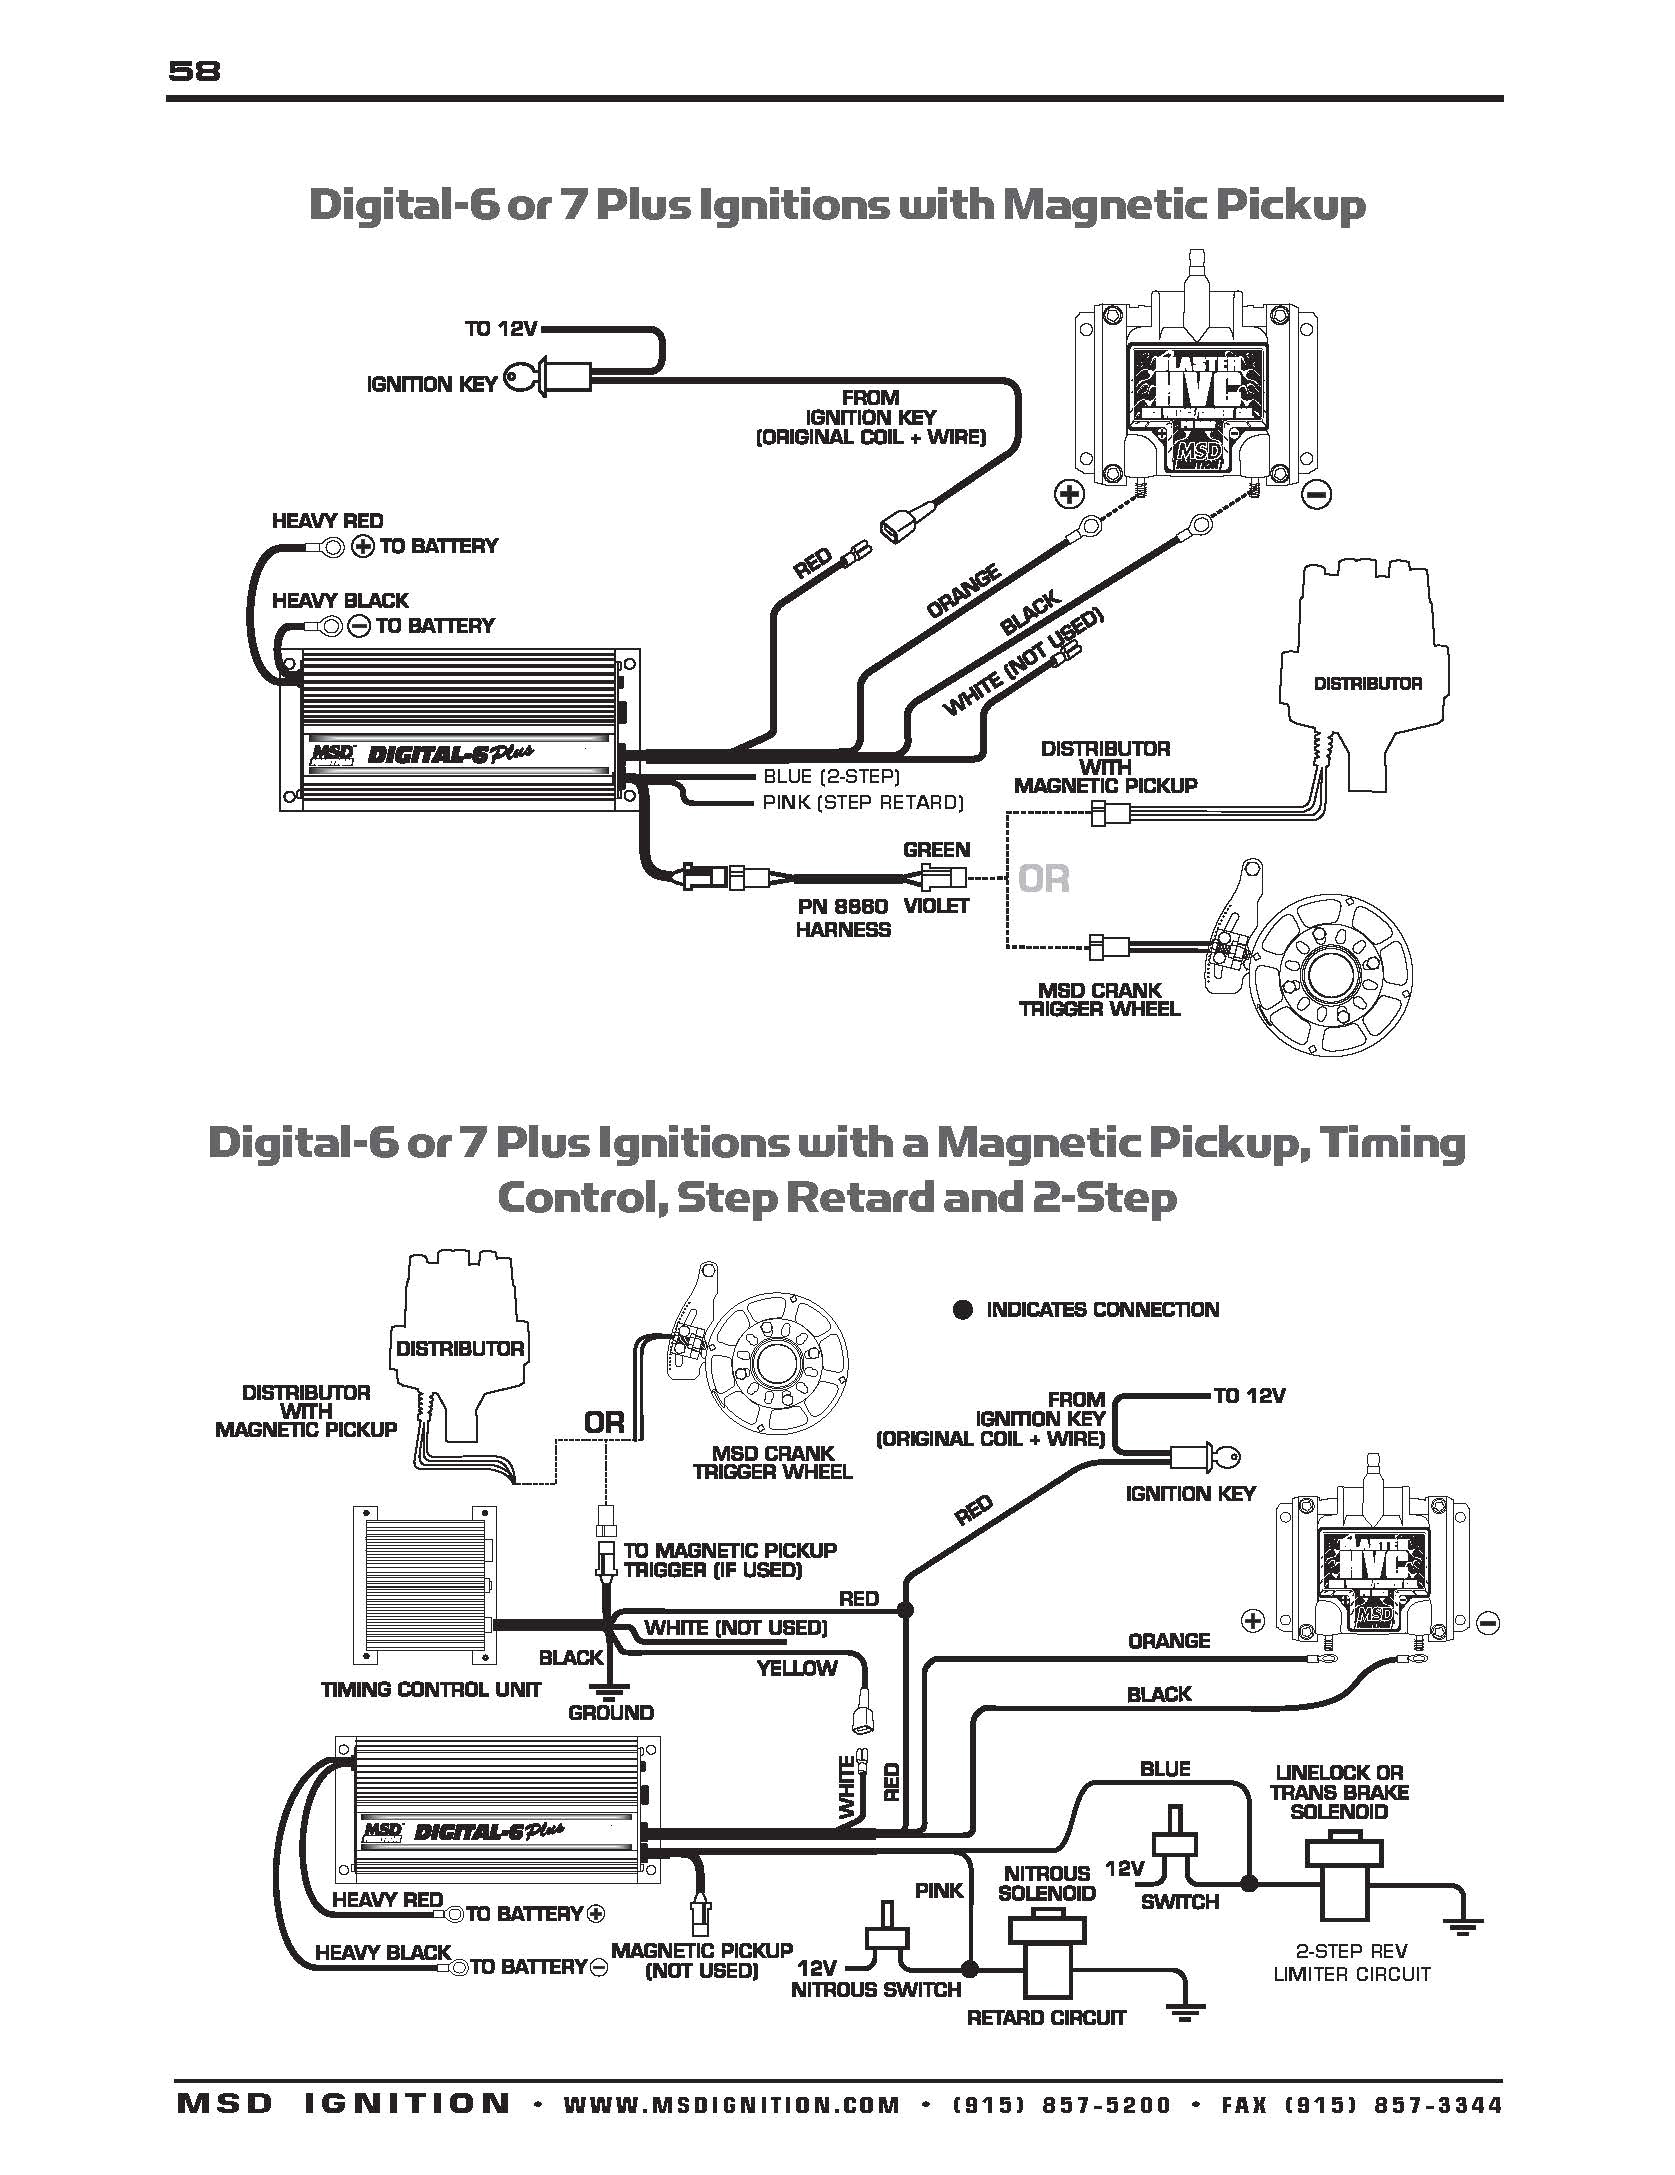 msd ignition wiring diagrams for digital 6 plus diagram pn 6425 and hei distributor jpg